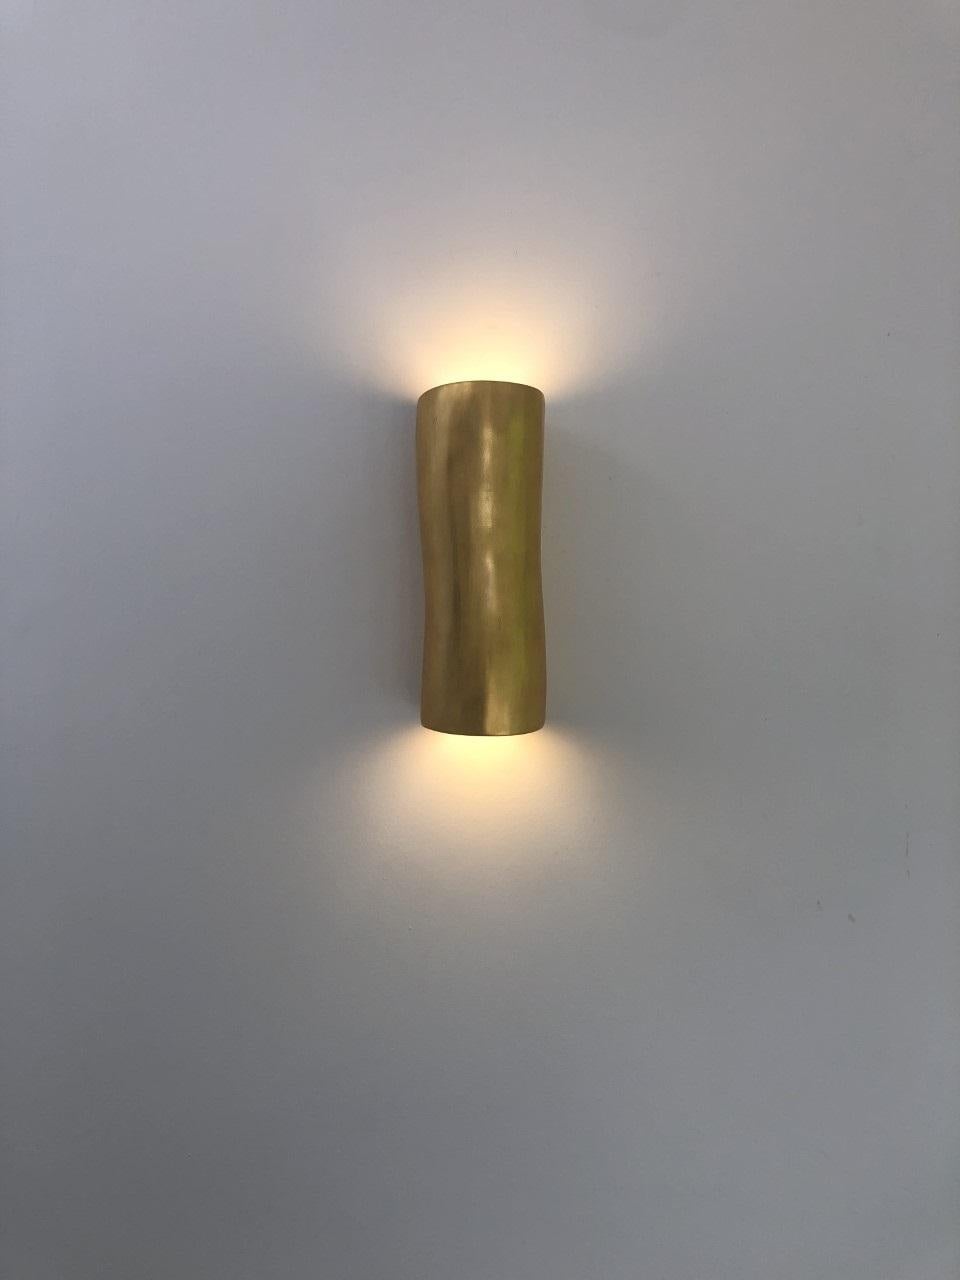 British Organic Modern Serenity Wall Sconce in 23.5 Carat Gold Leaf by Hannah Woodhouse